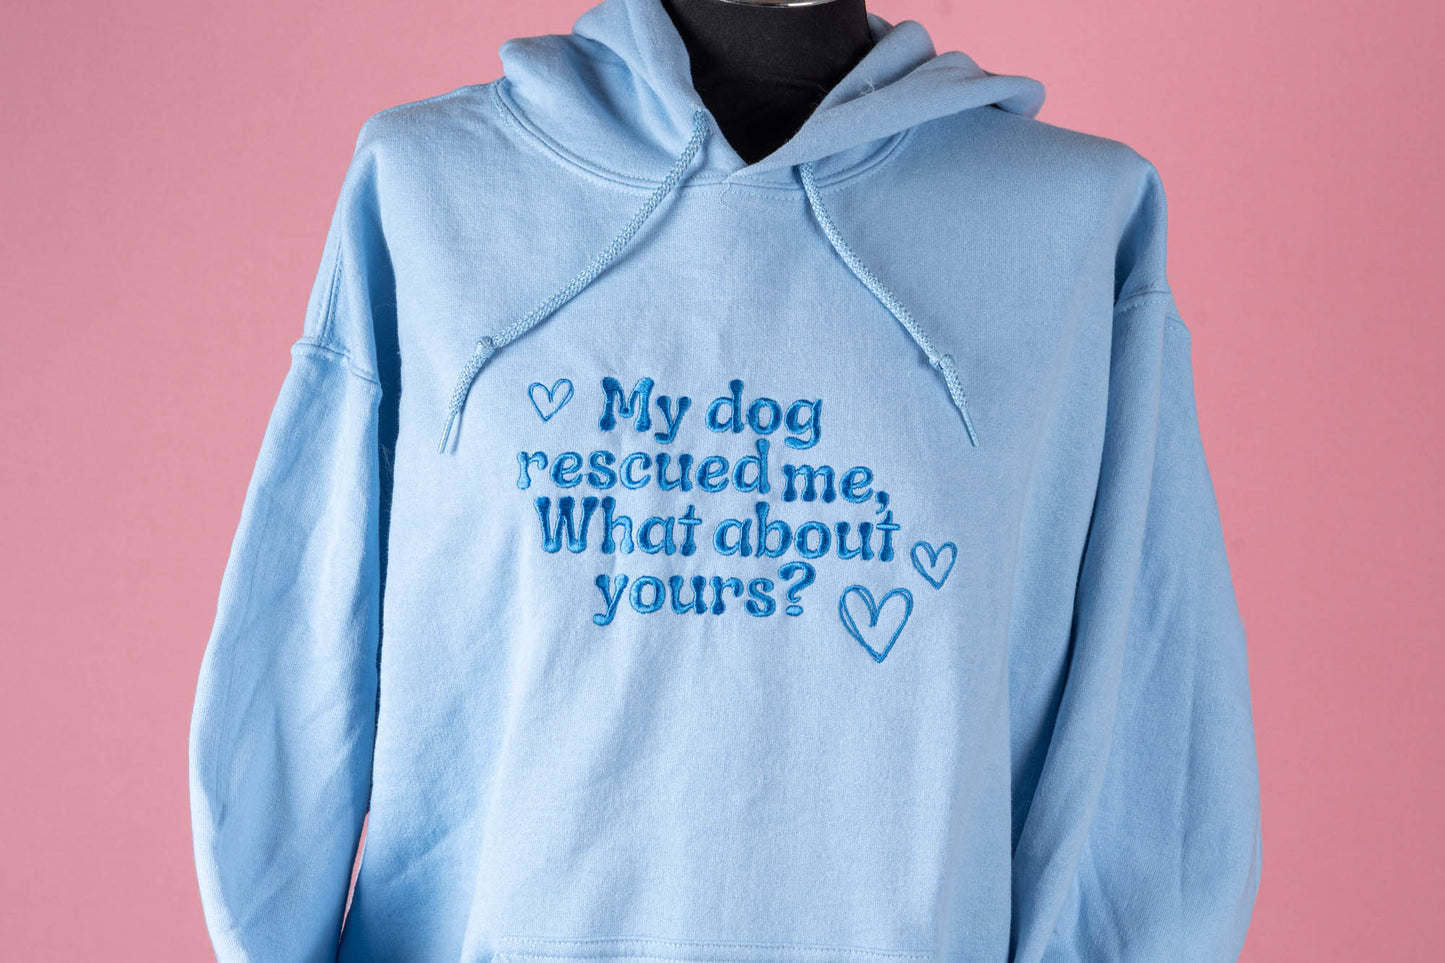 "My Dog Rescued me" Embroidered Hoodie